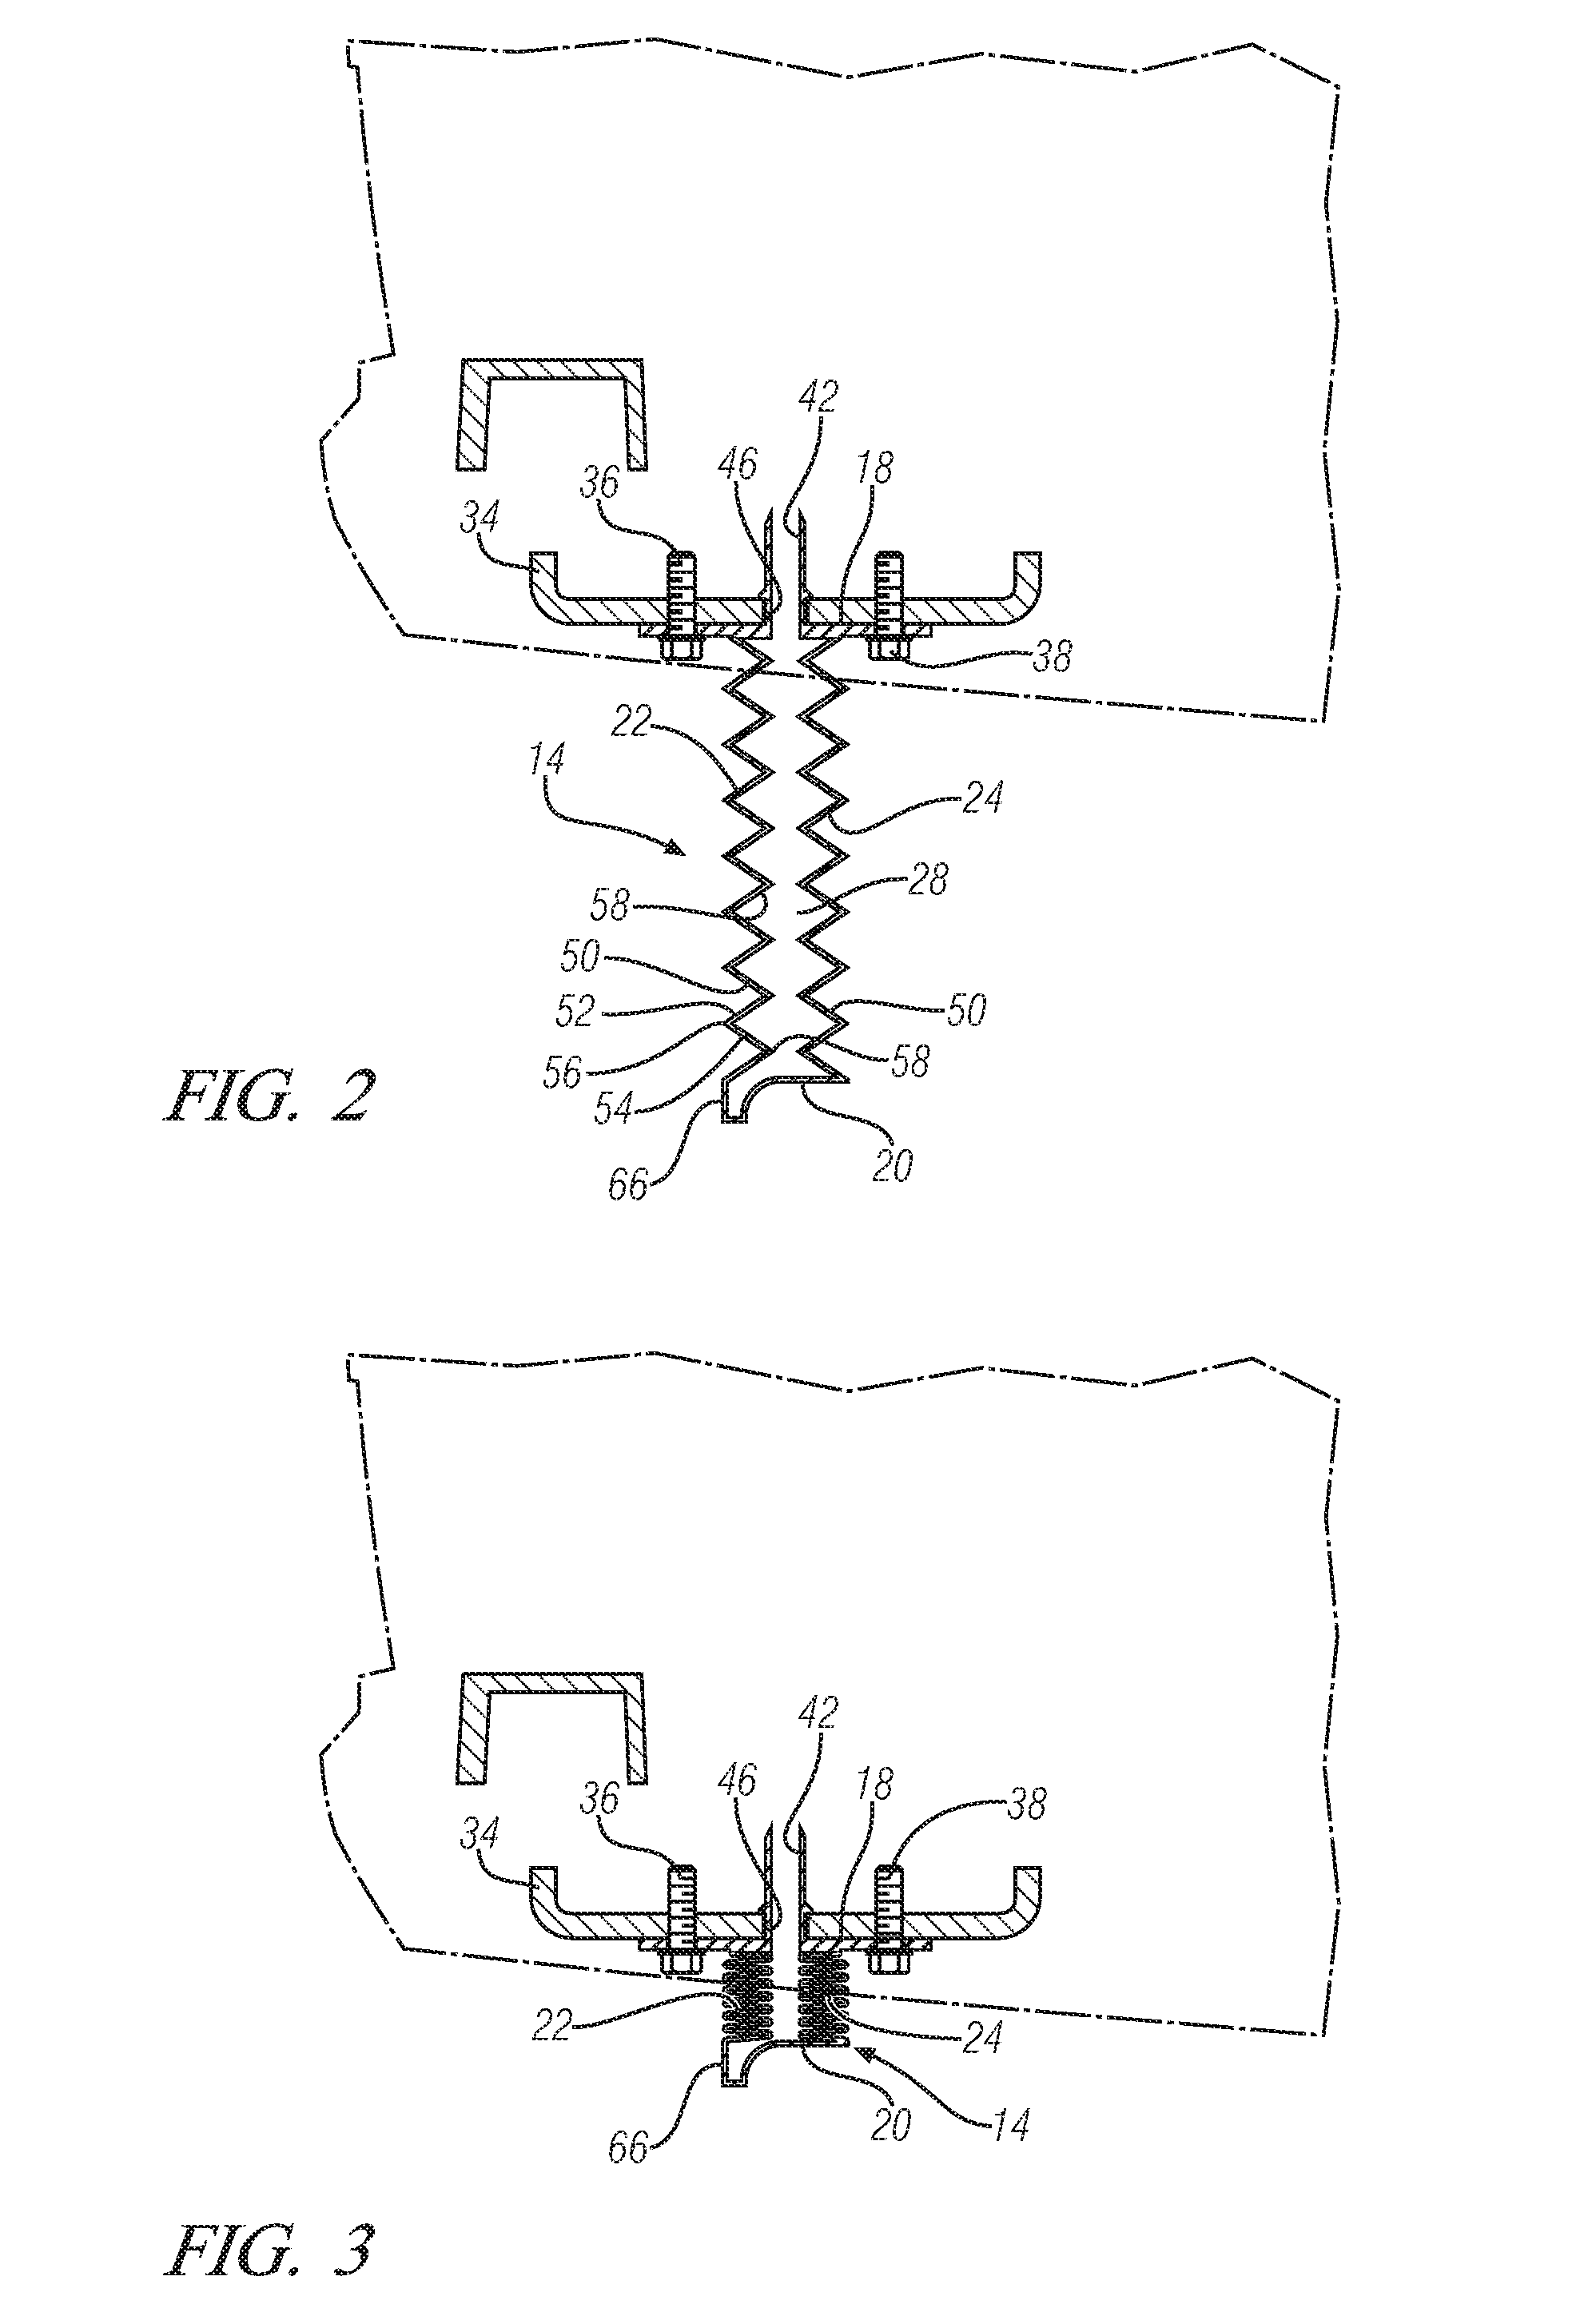 Extendable air control dam for vehicle